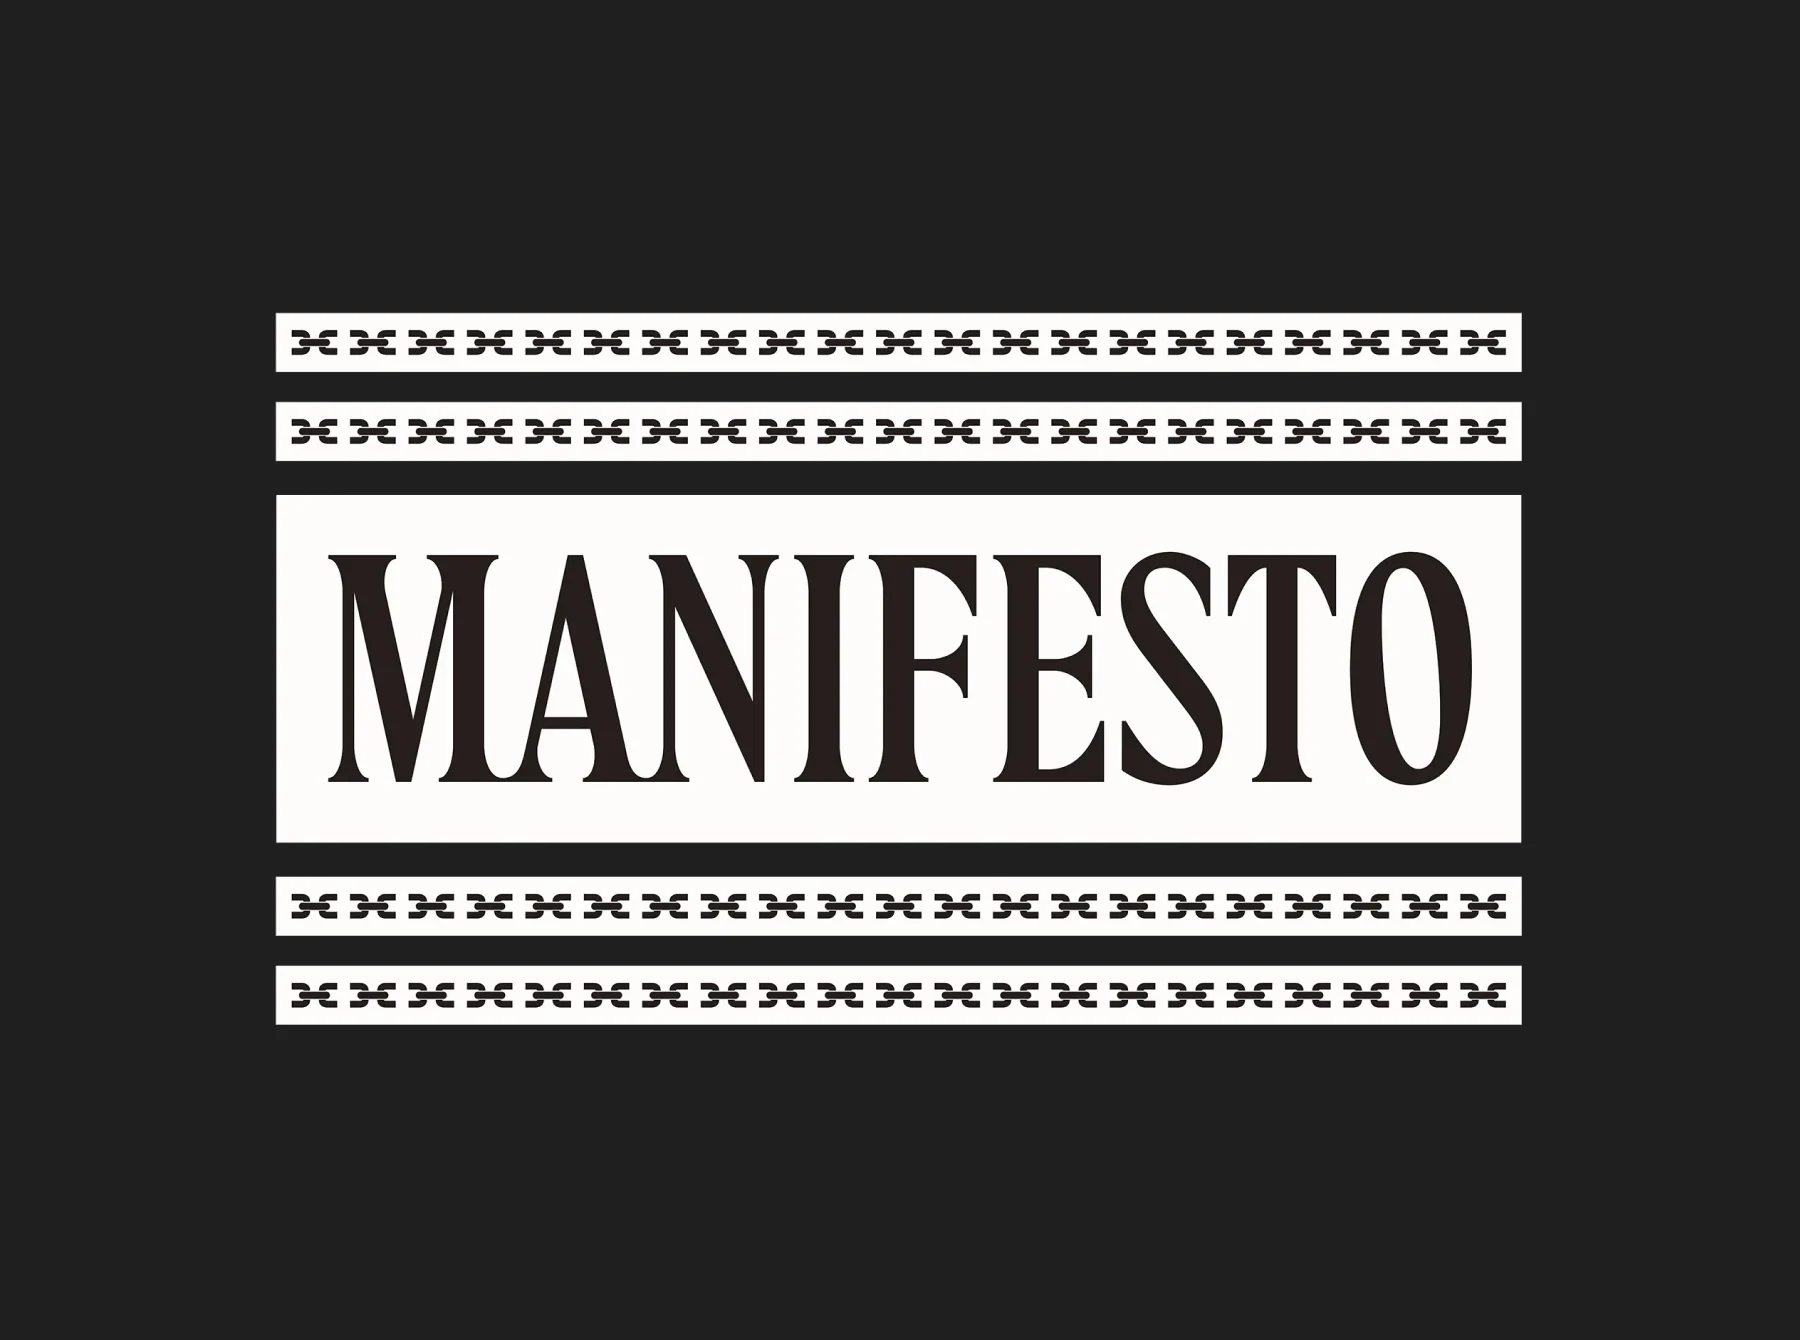 A Manifesto by Patrisse Cullors